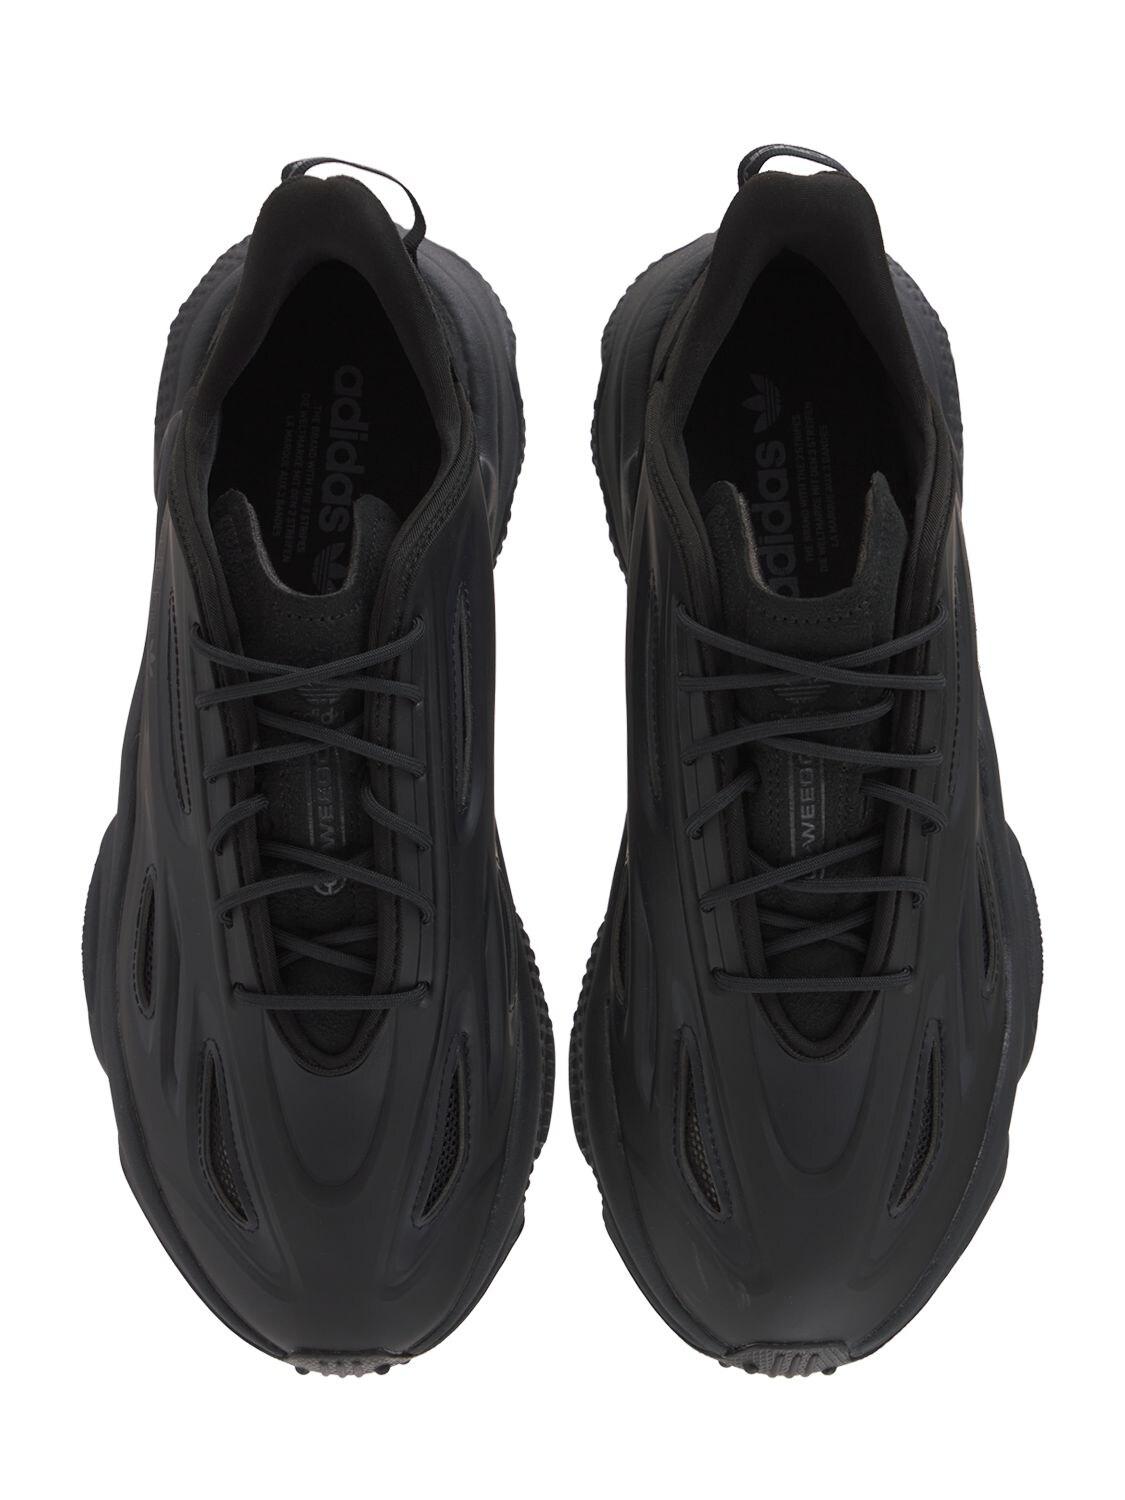 adidas Originals Synthetic Ozweego Celox Sneakers in Black for Men 